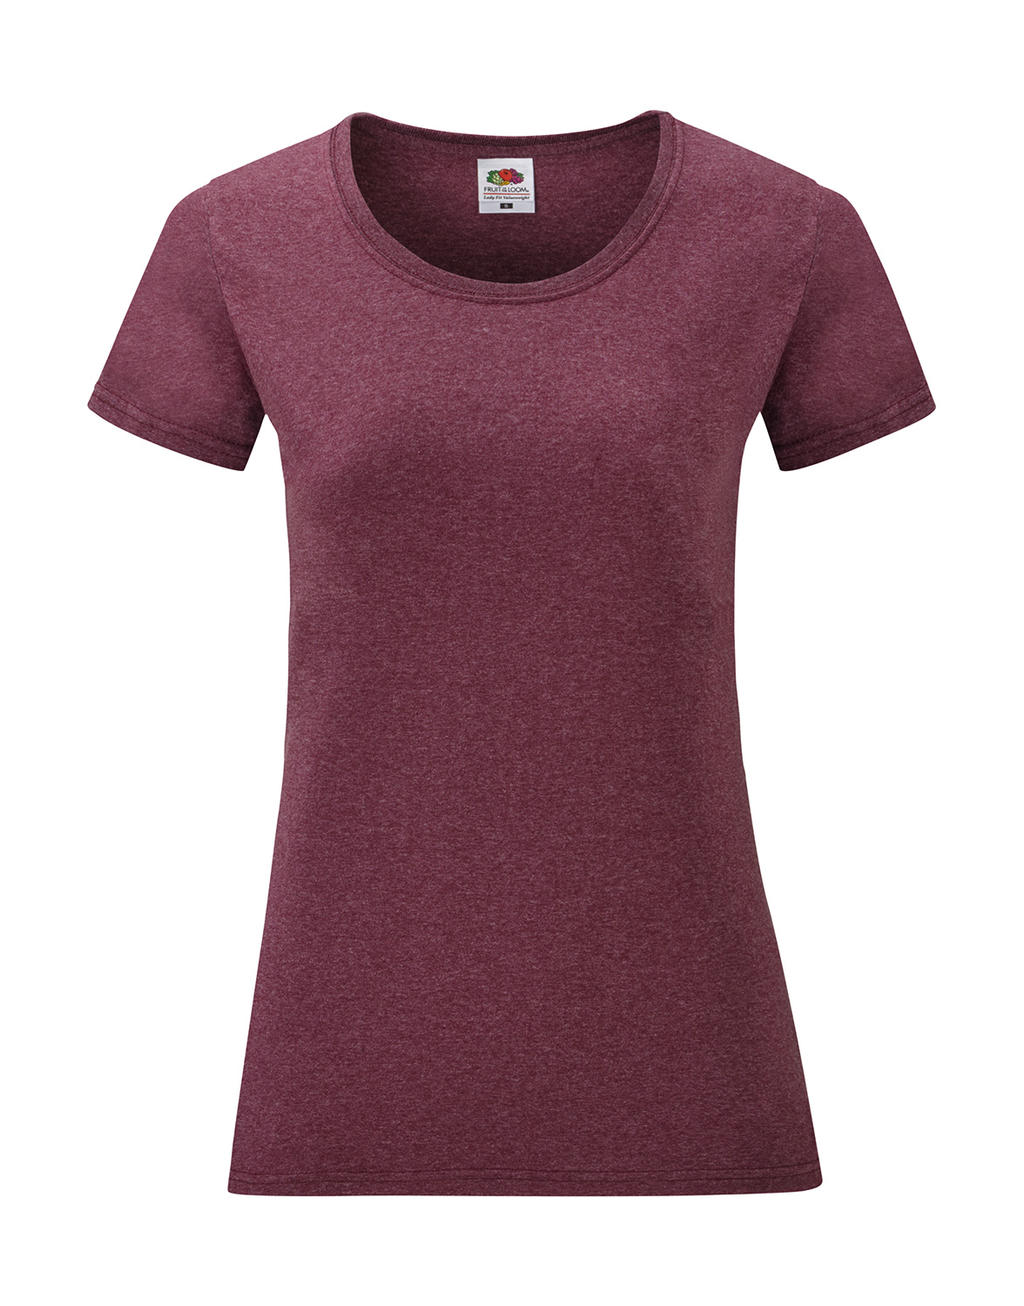  Ladies Valueweight T in Farbe Heather Burgundy